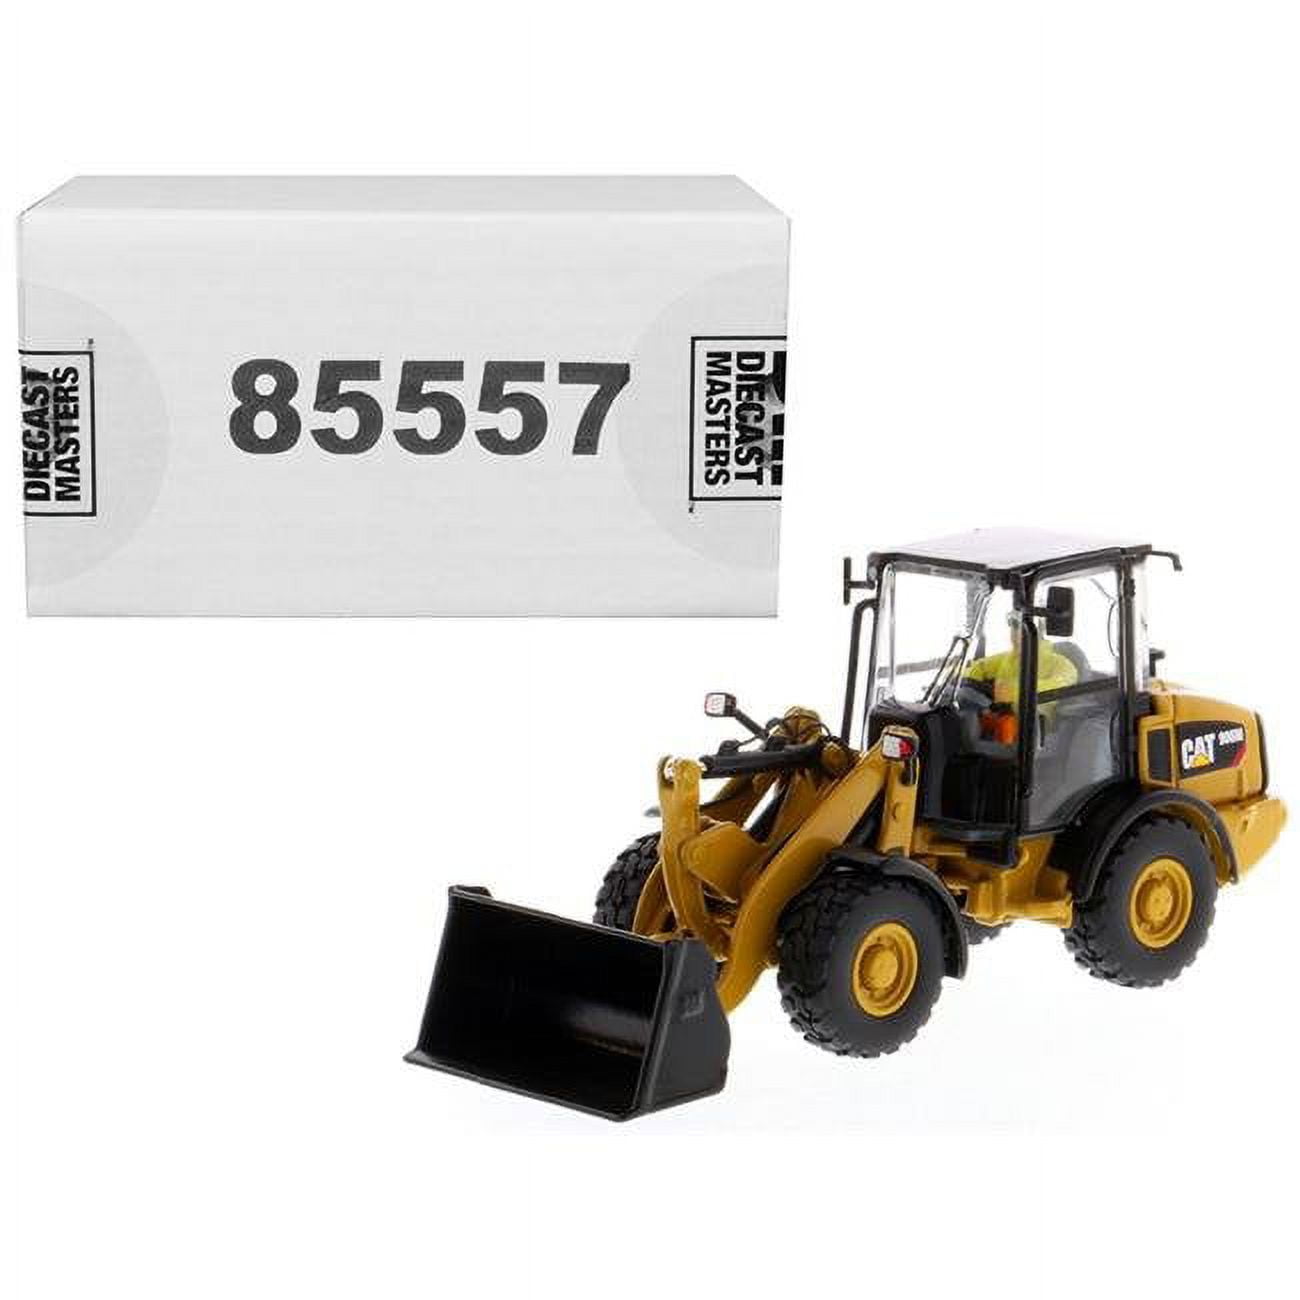 85557 1-50 Cat Caterpillar 906m Diecast Model Compact Wheel Loader With Operator